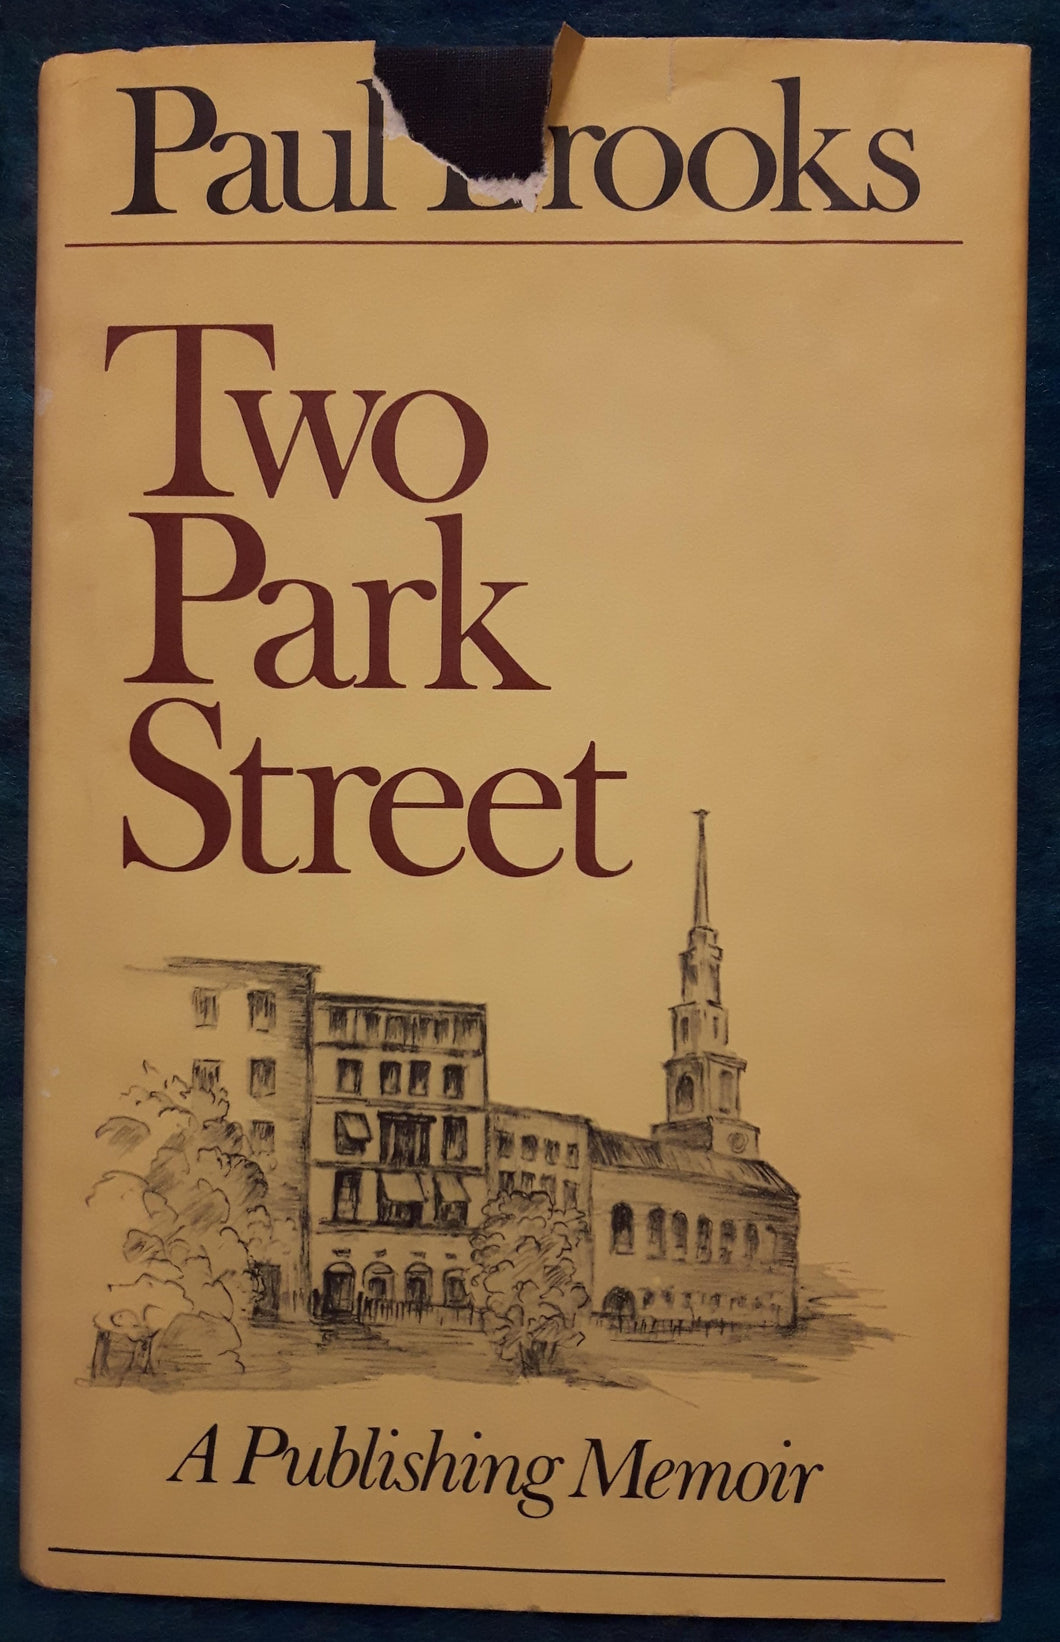 Two Park Street